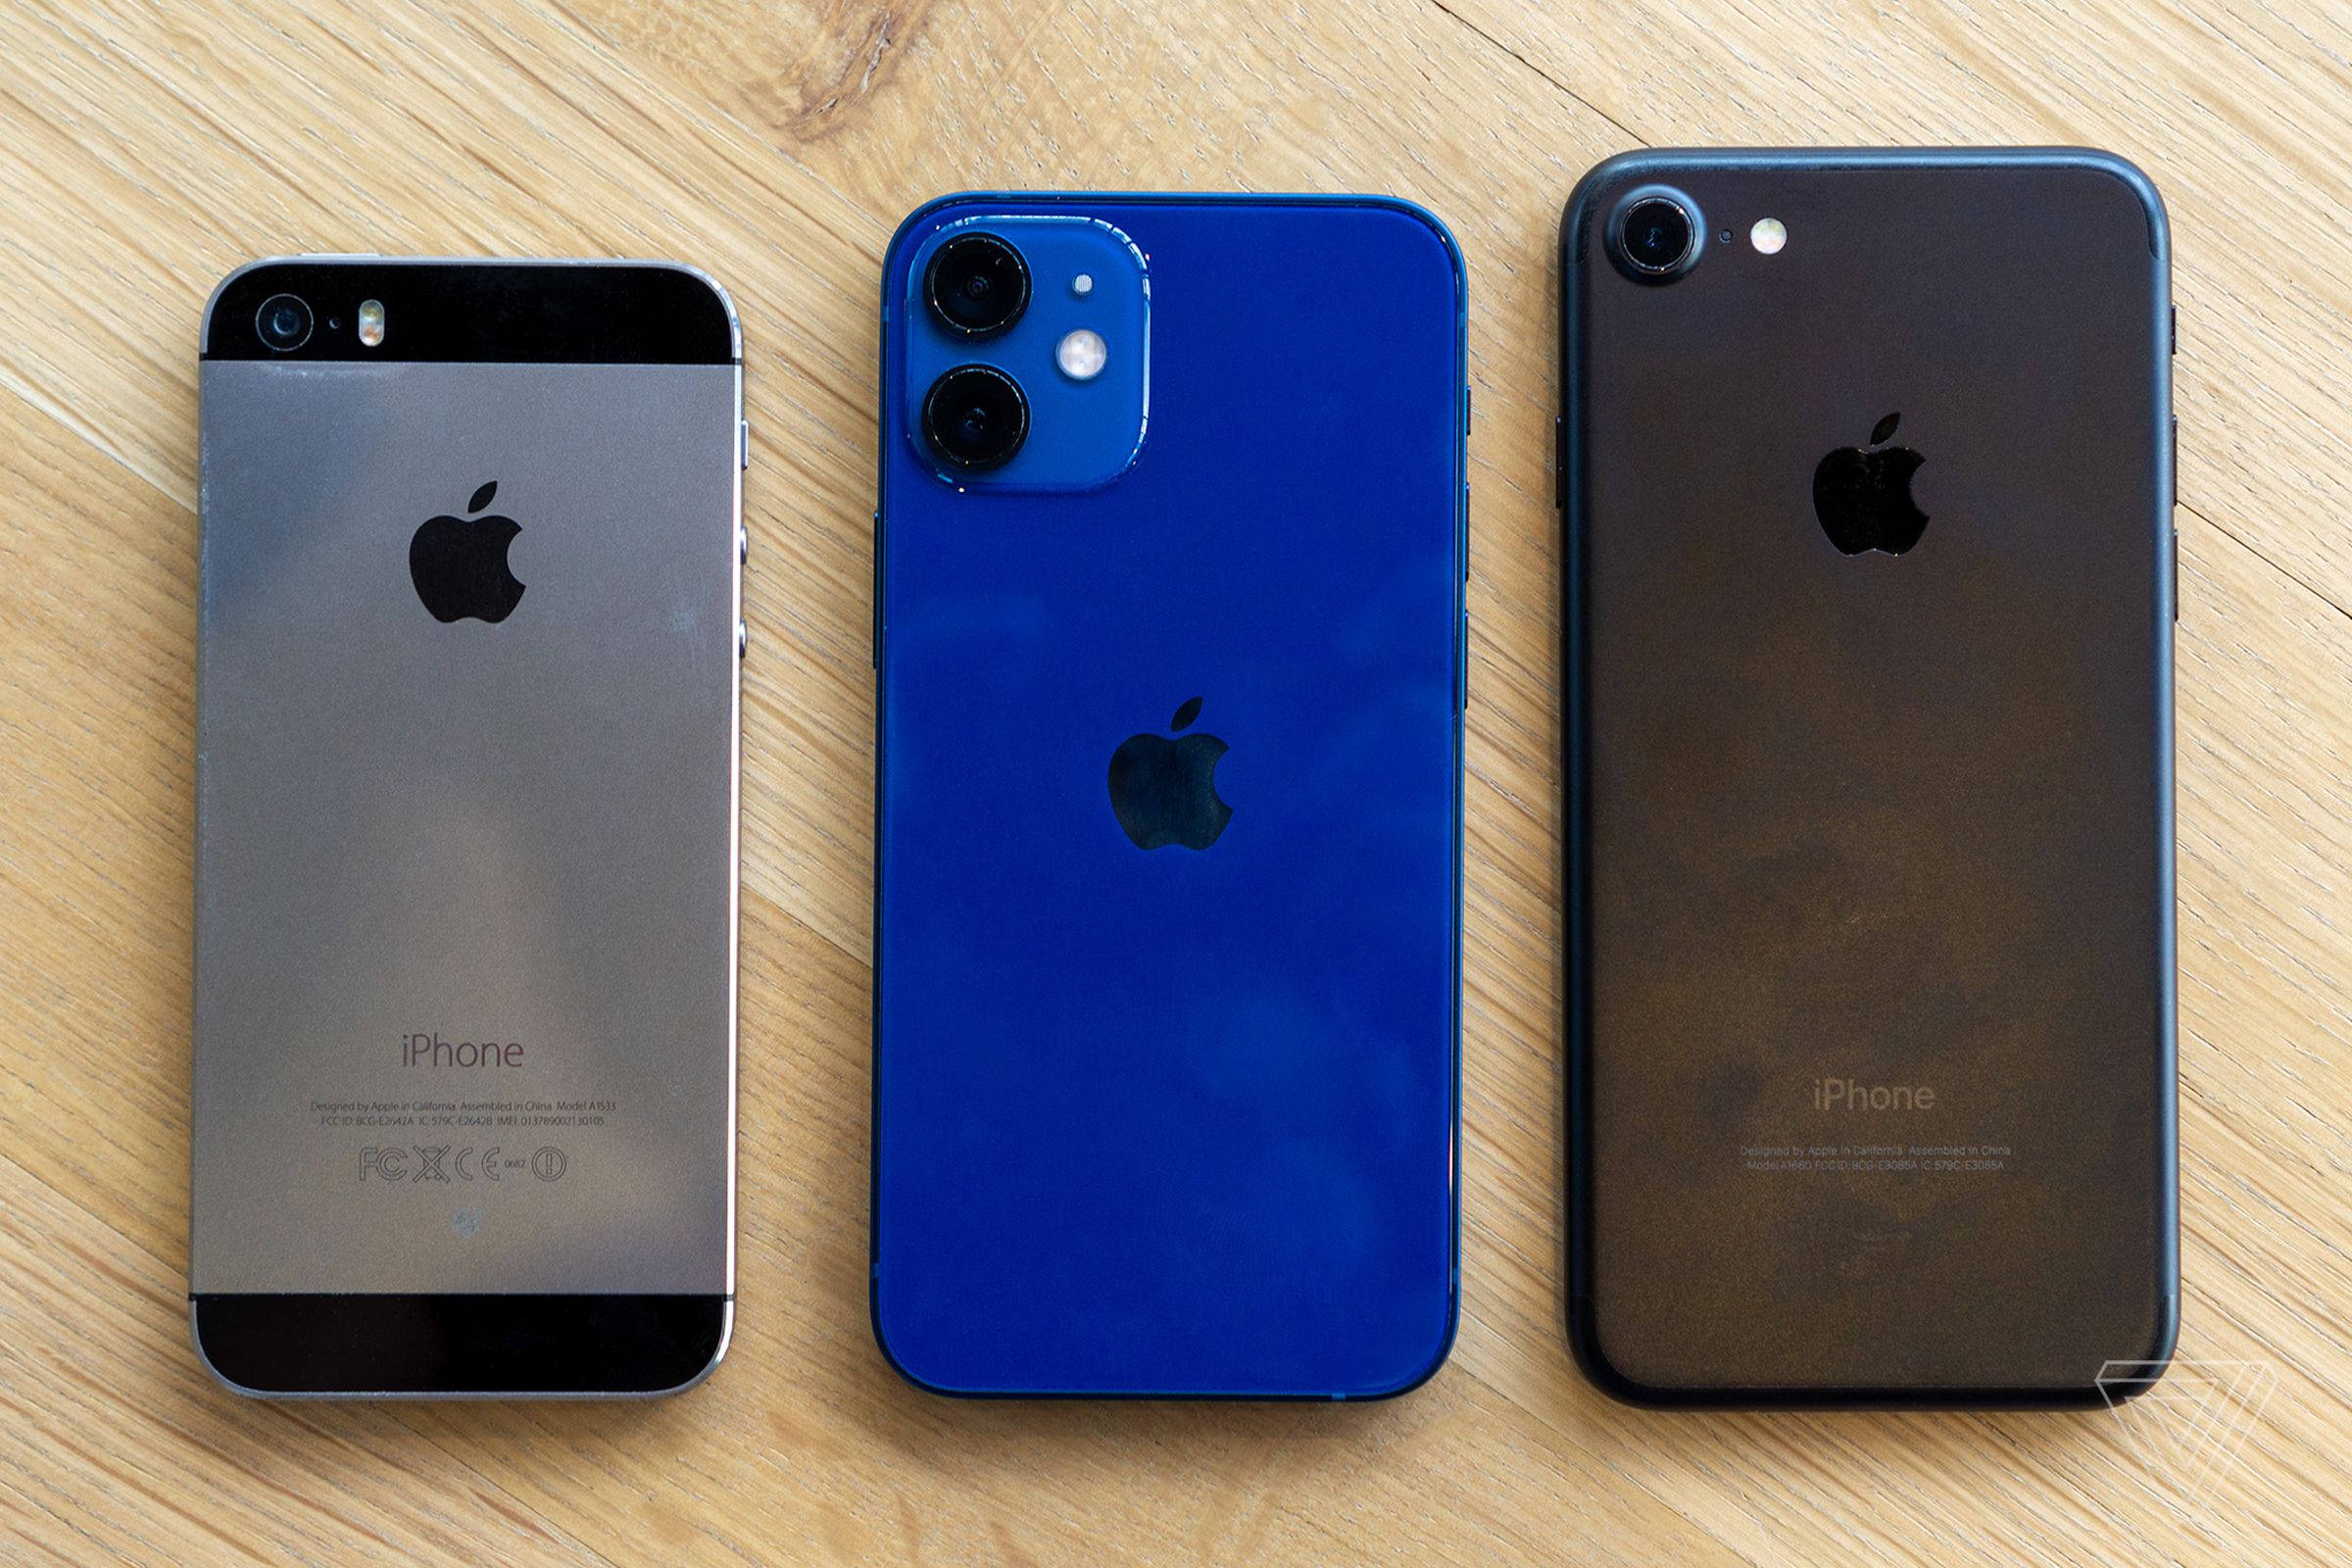 From left to right: the iPhone 5S, iPhone 12 mini, and iPhone 7.